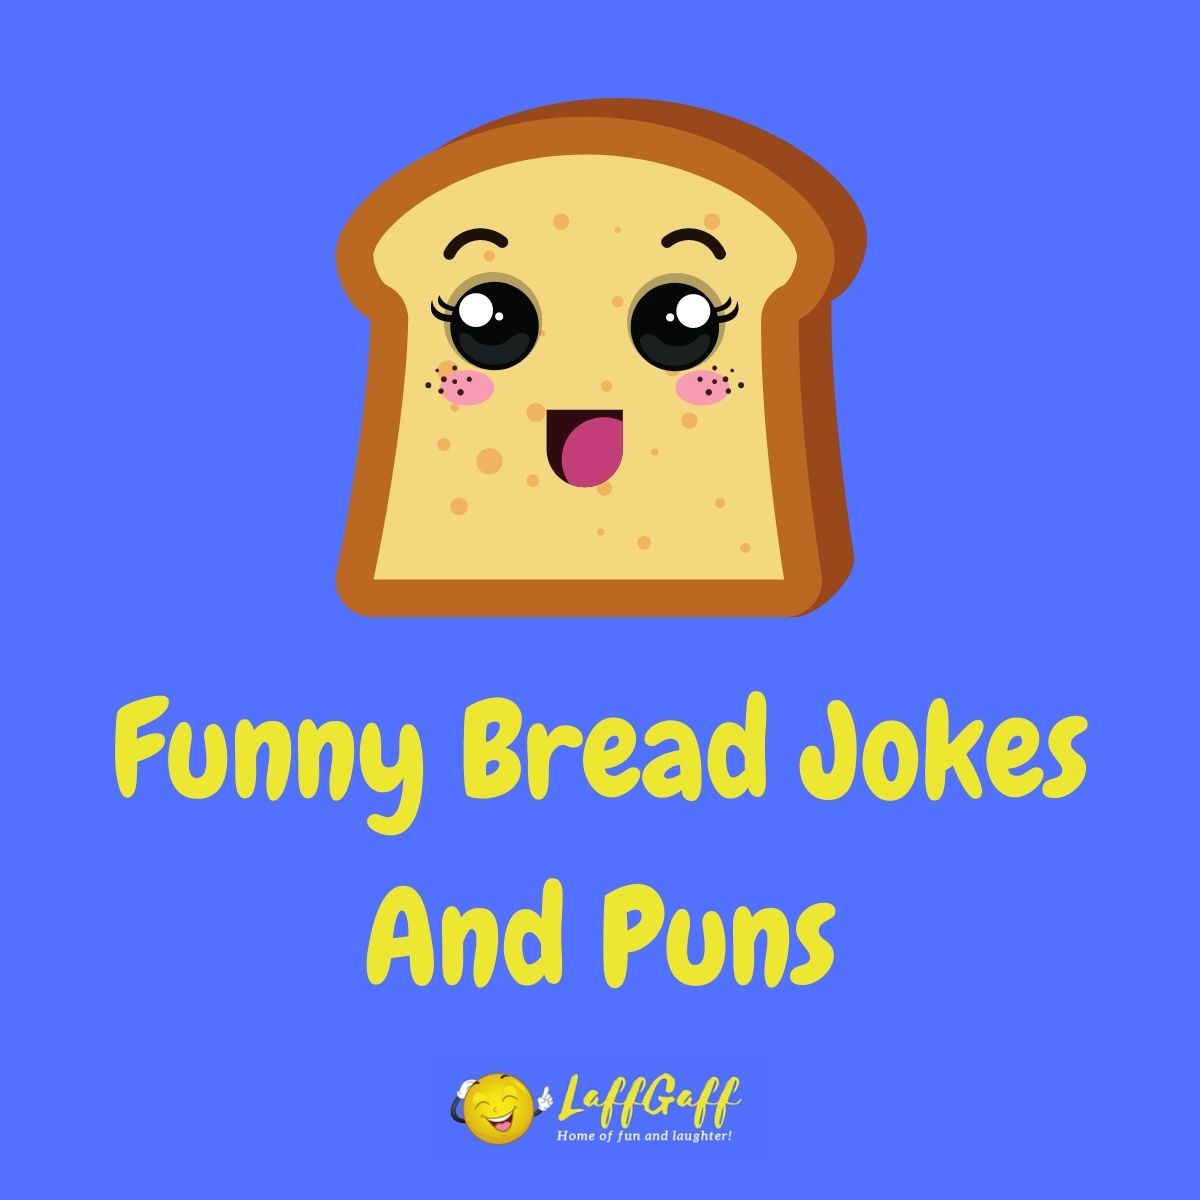 Featured image for a page of funny bread jokes and puns.